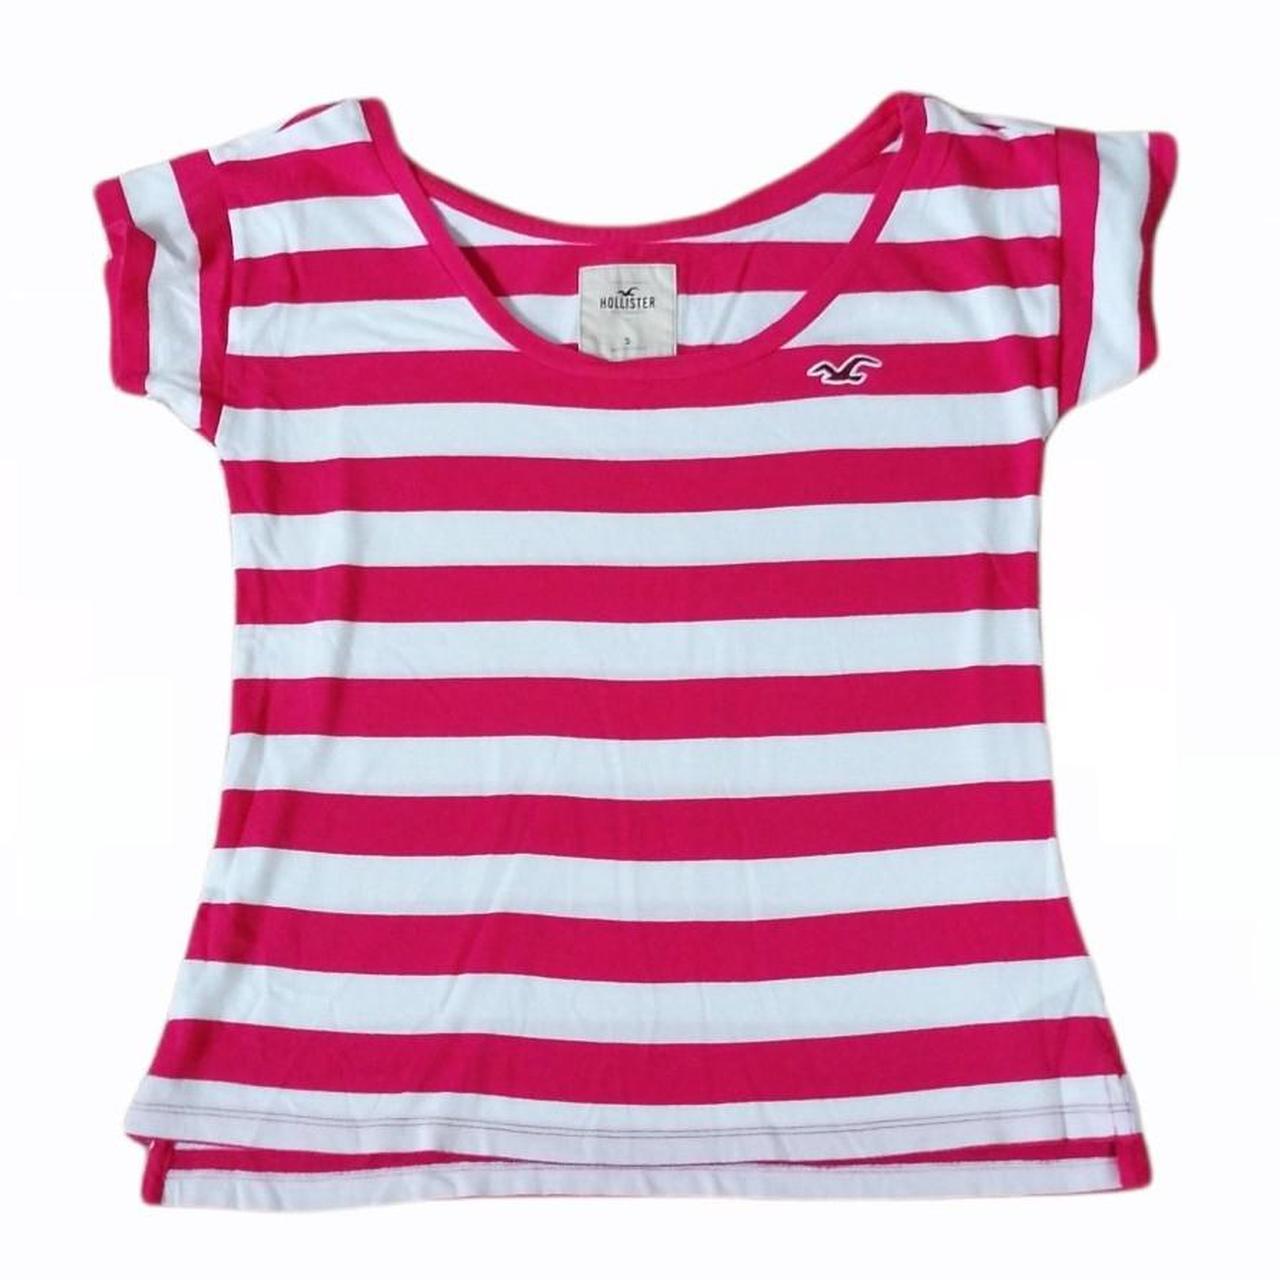 Pink and white striped hollister t-shirt, A cute y2k